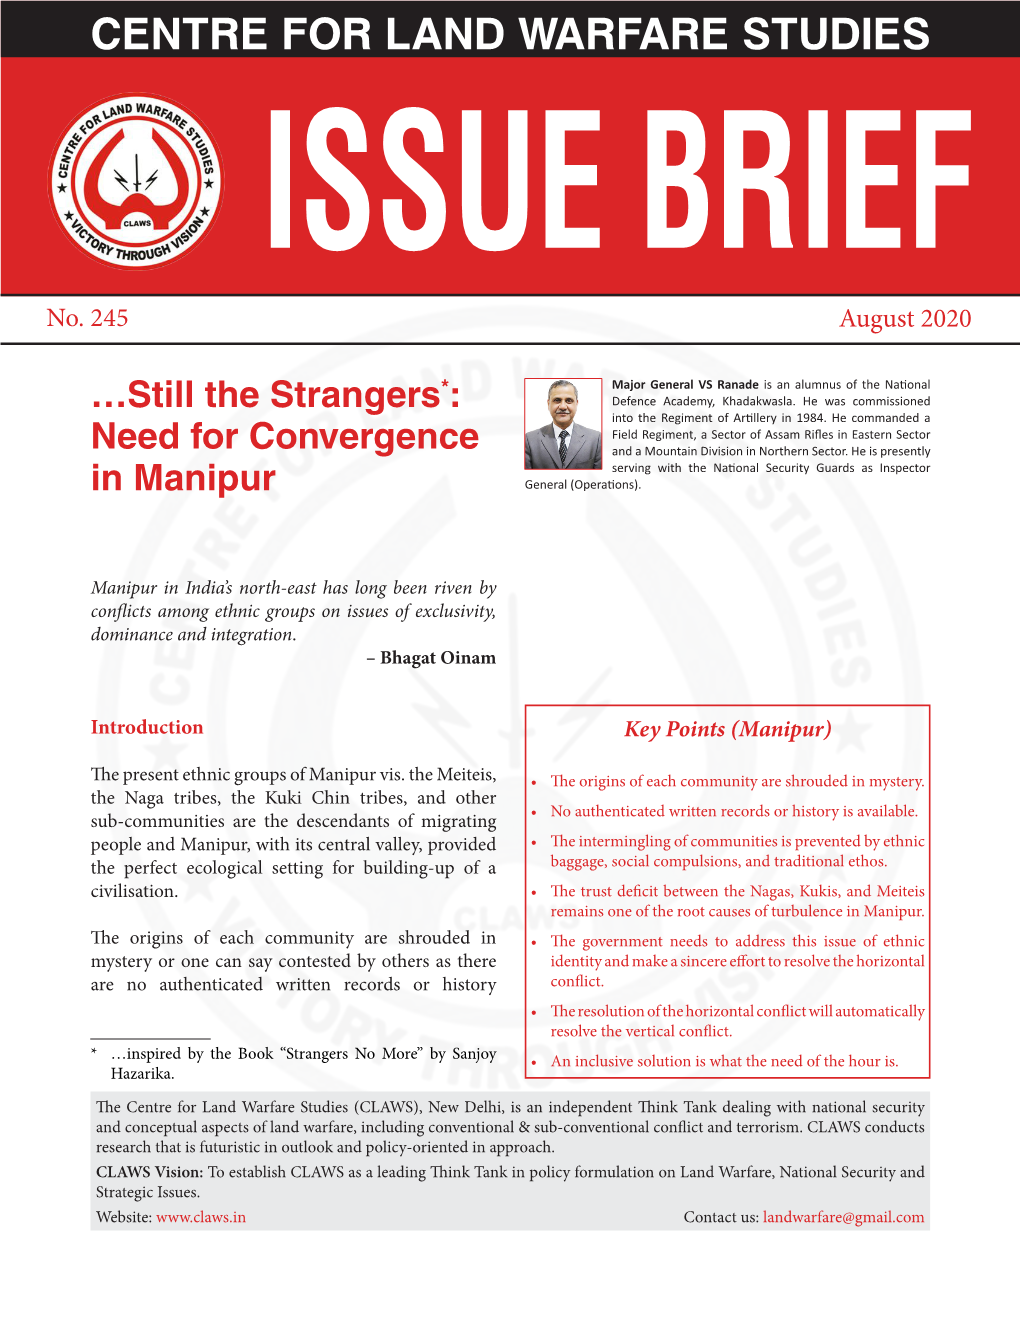 Still the Stranger : Need for Convergence in Manipur